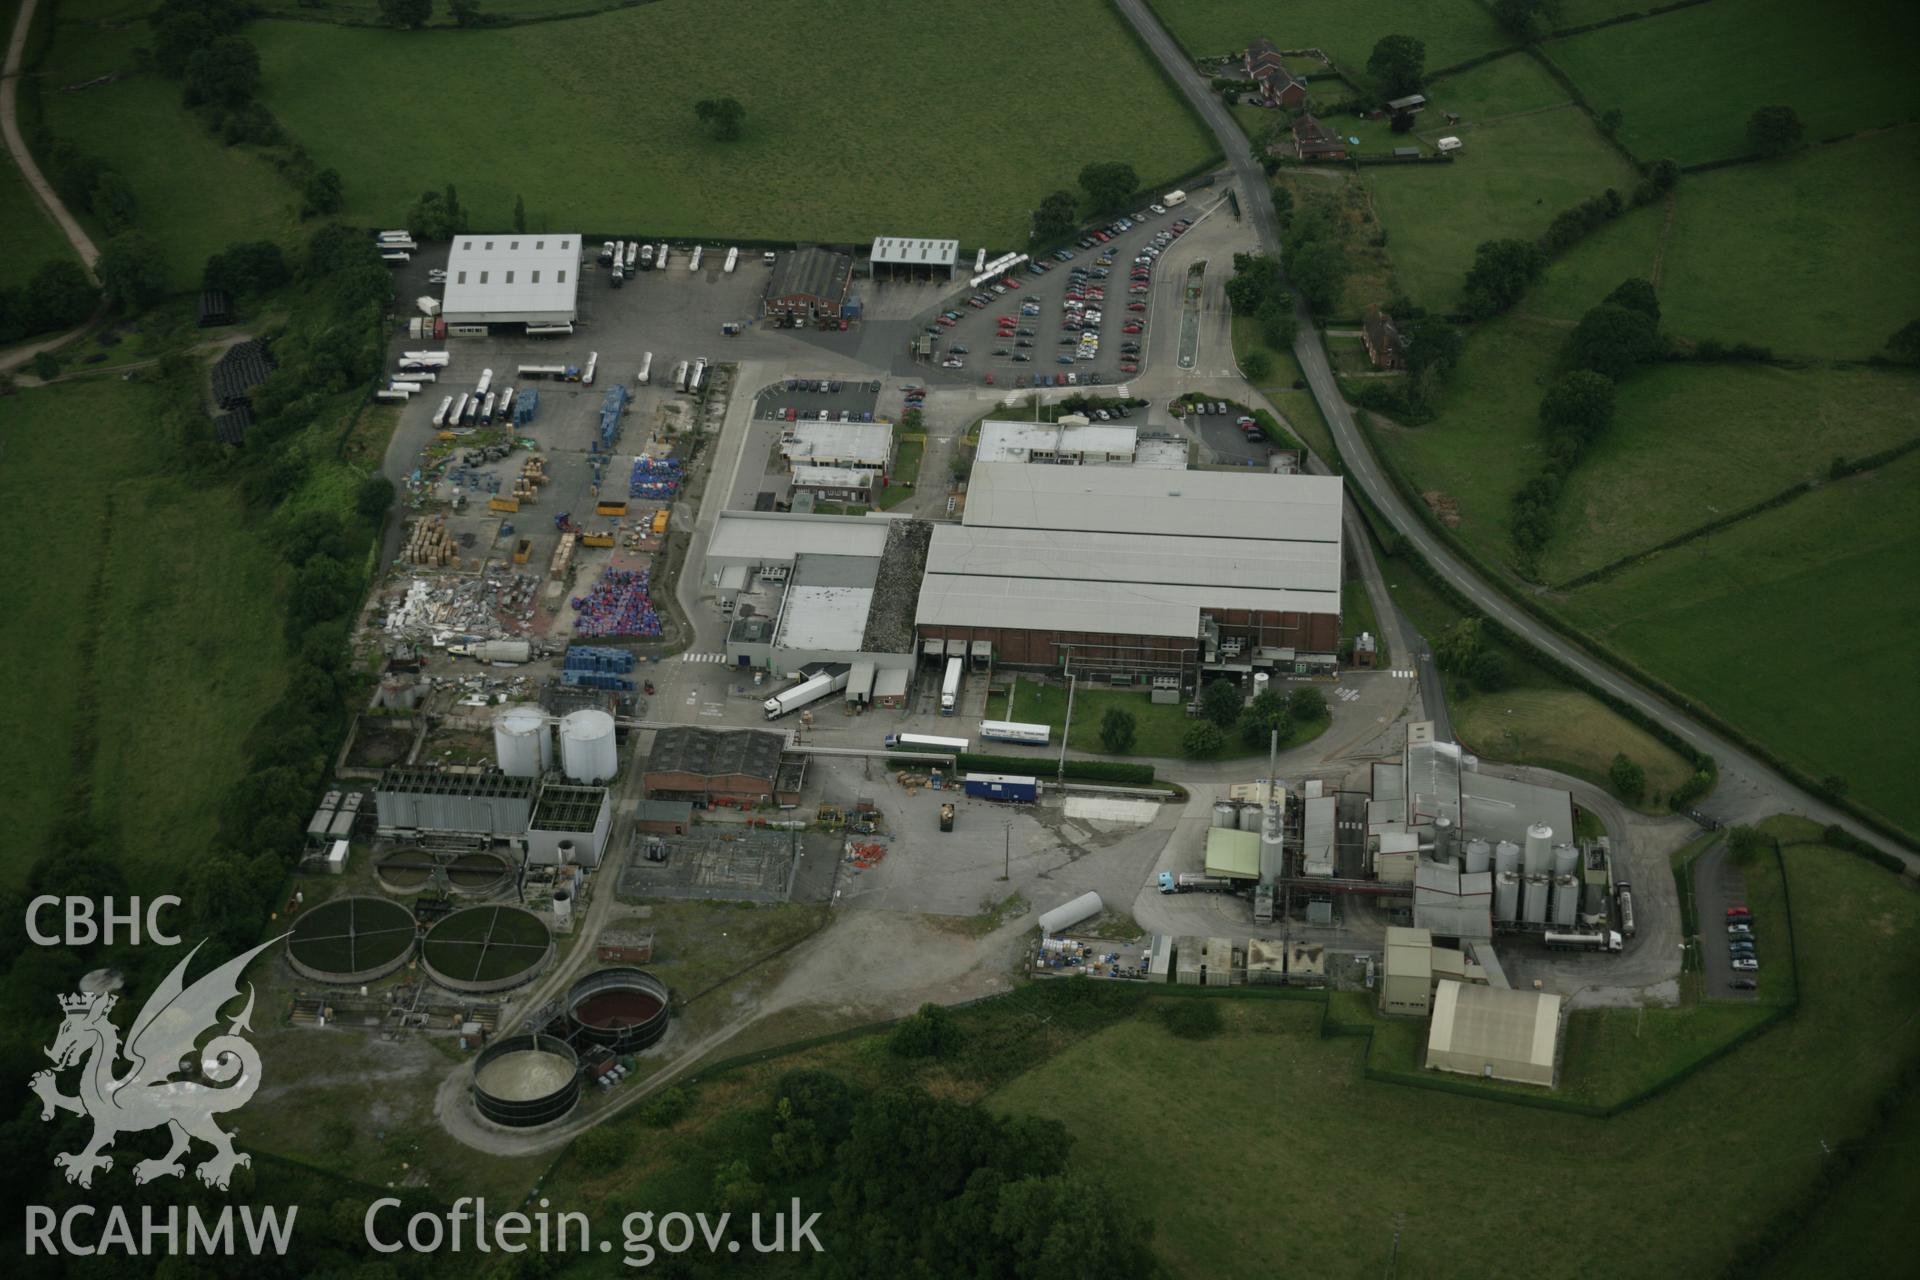 RCAHMW digital colour oblique photograph of Maelor Creamery, Wrexham, viewed from the east. Taken on 01/08/2005 by T.G. Driver.